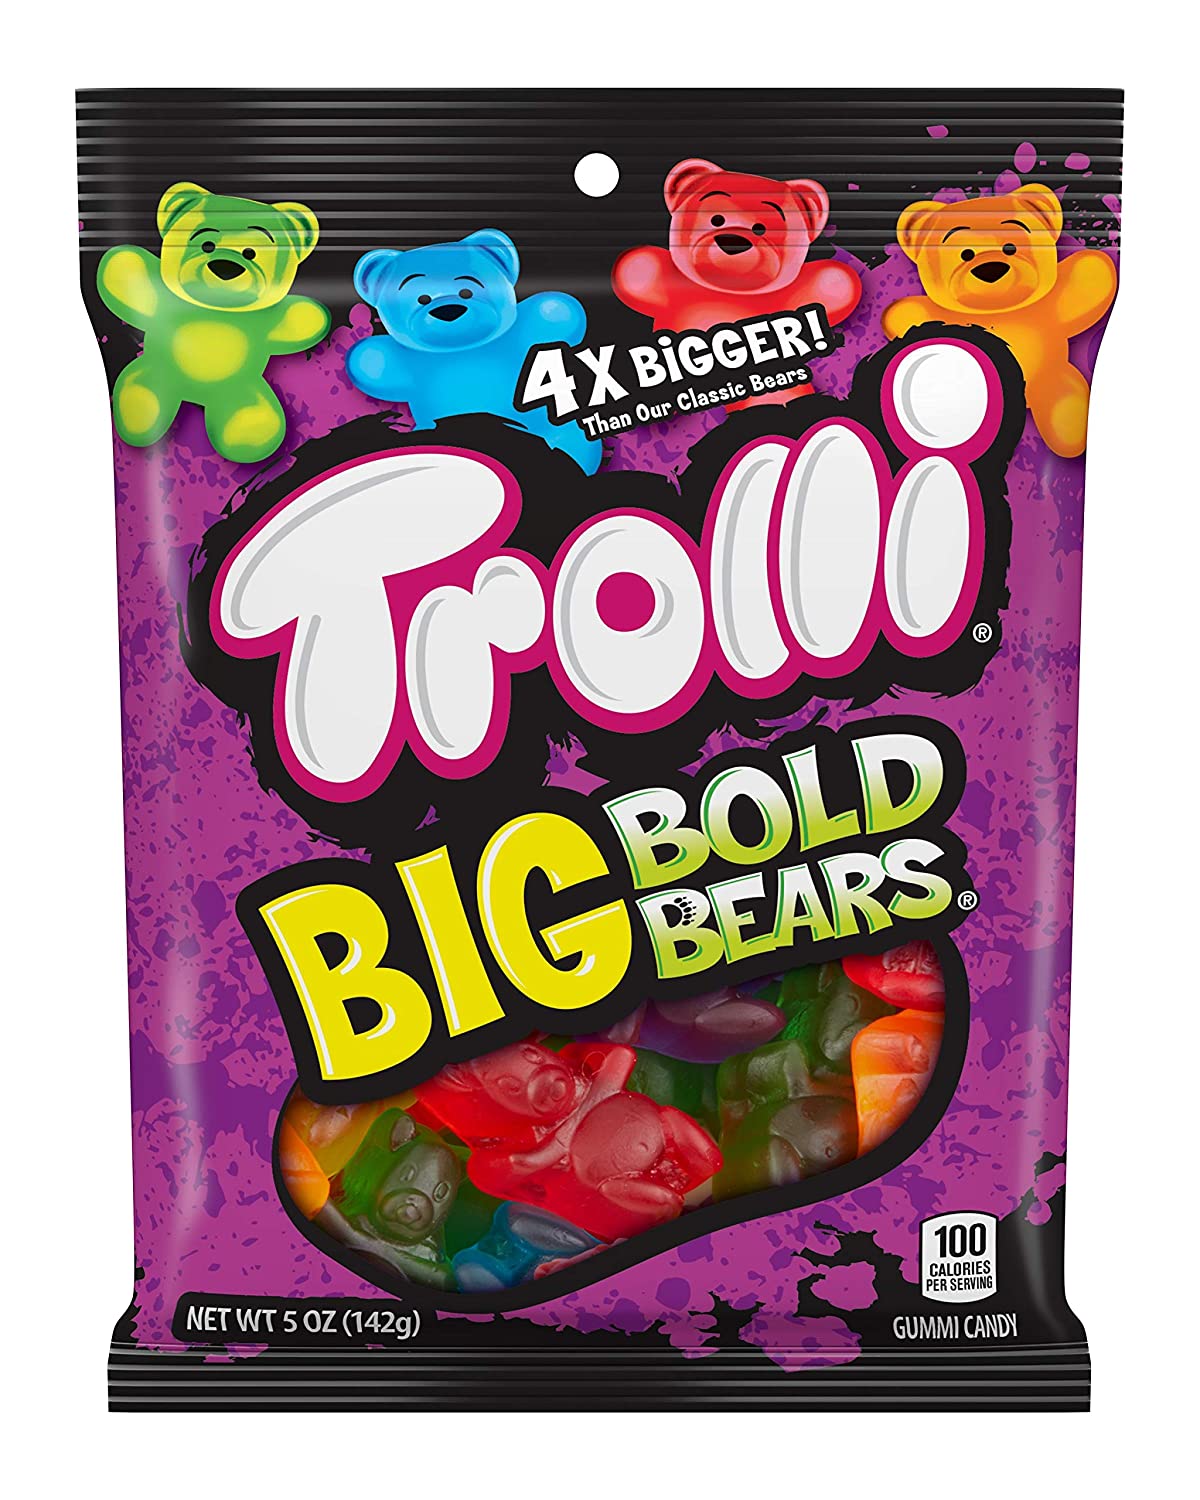 53 Mind-blowing Freeze Dried Candy Treats That You NEED To